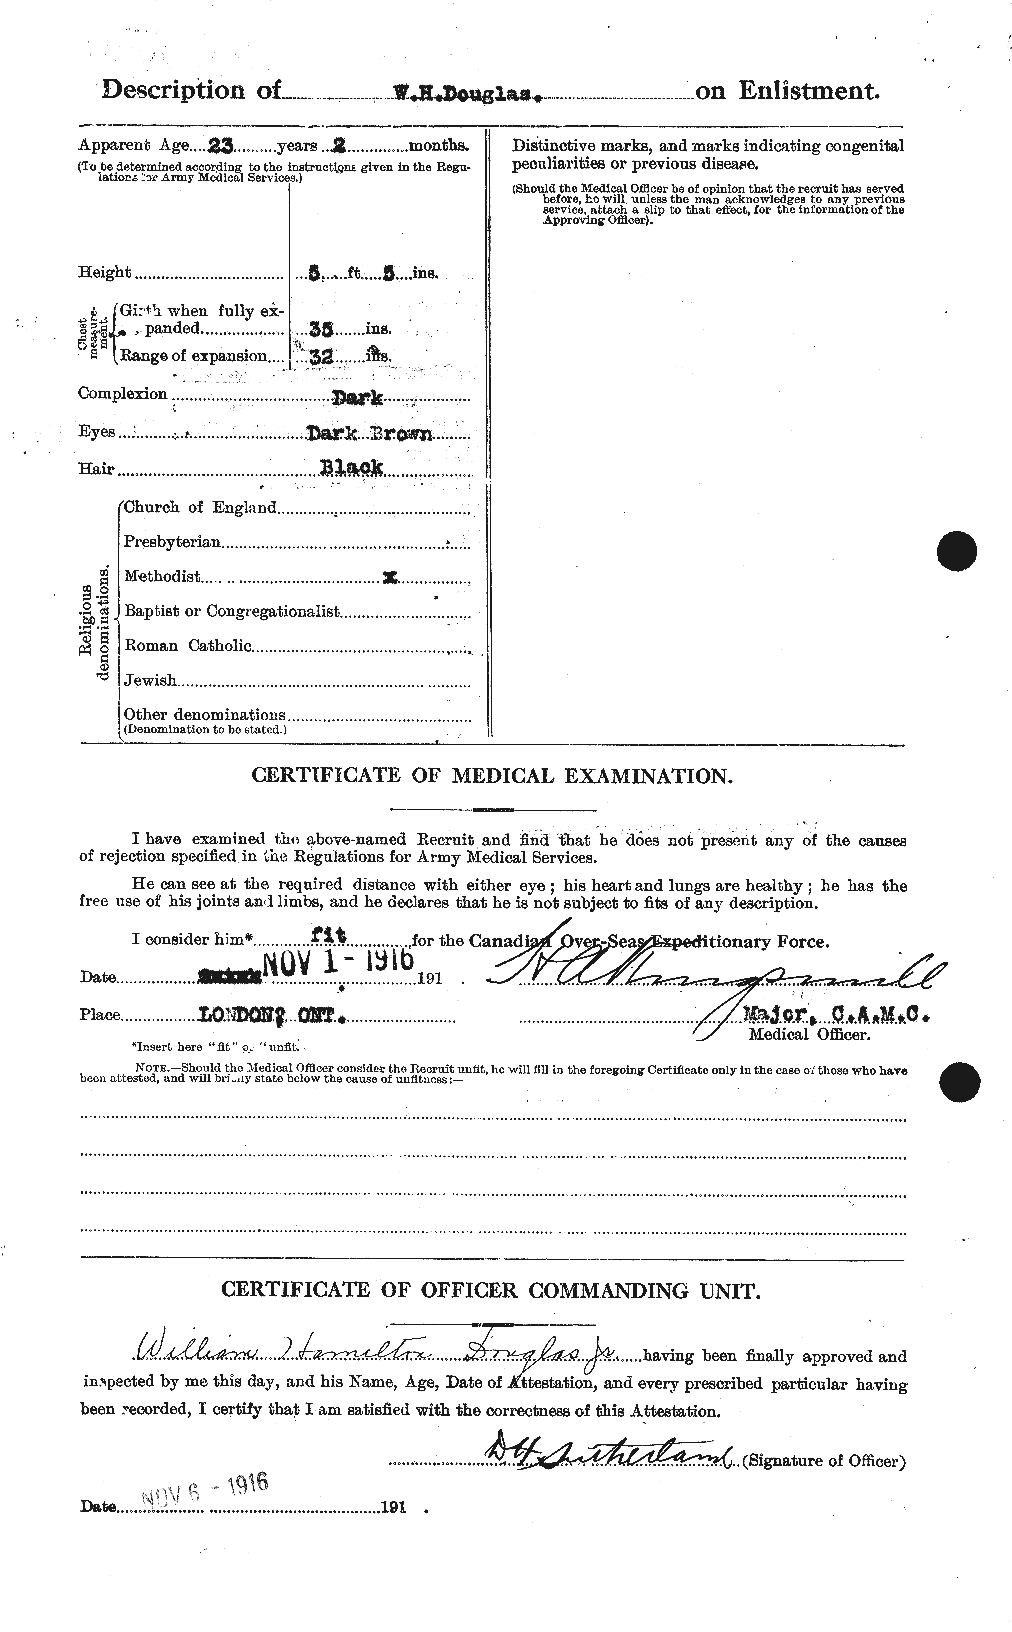 Personnel Records of the First World War - CEF 295338b